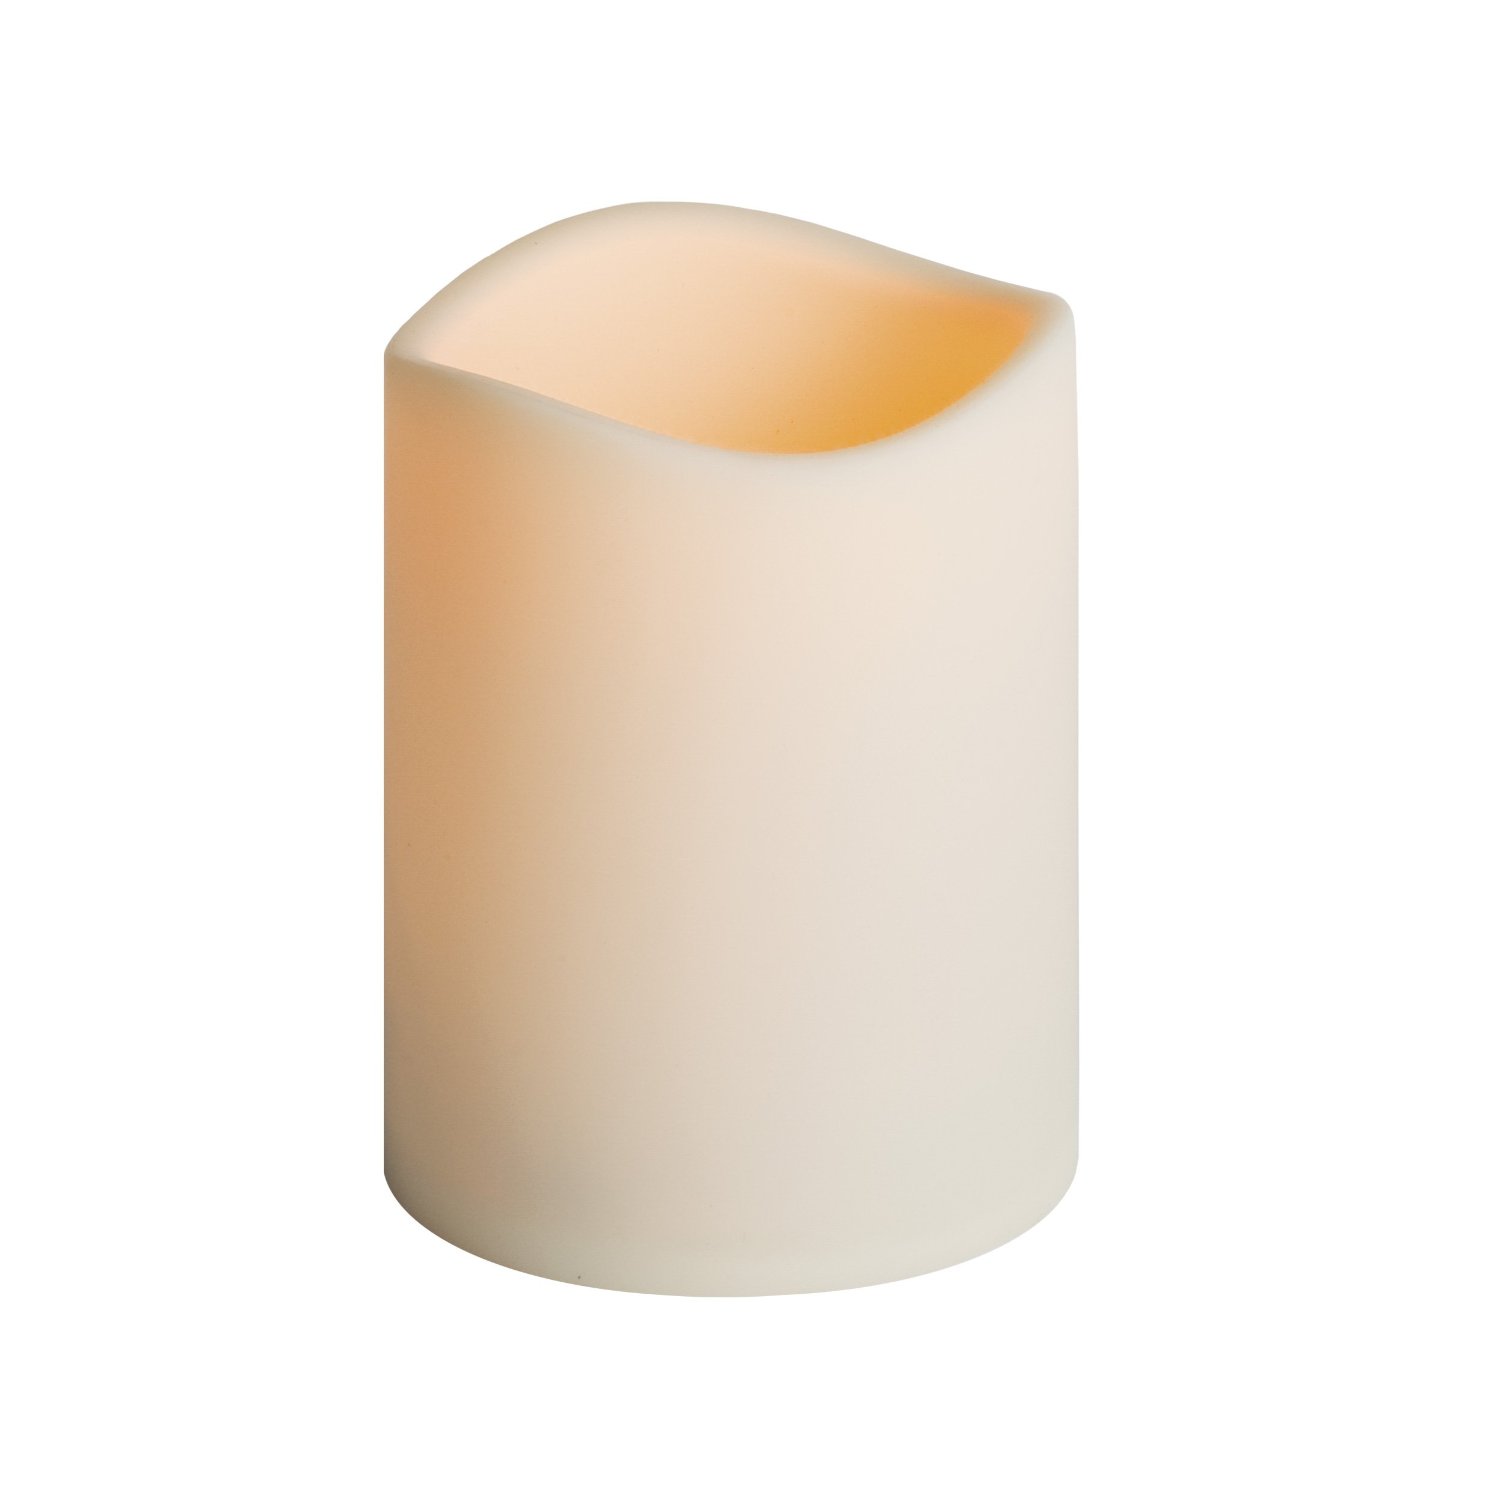 Everlasting Glow Indoor Outdoor Flameless Candle with Timer, Bisque, 6-Inch Tall by 4-1/2-Inch Diameter